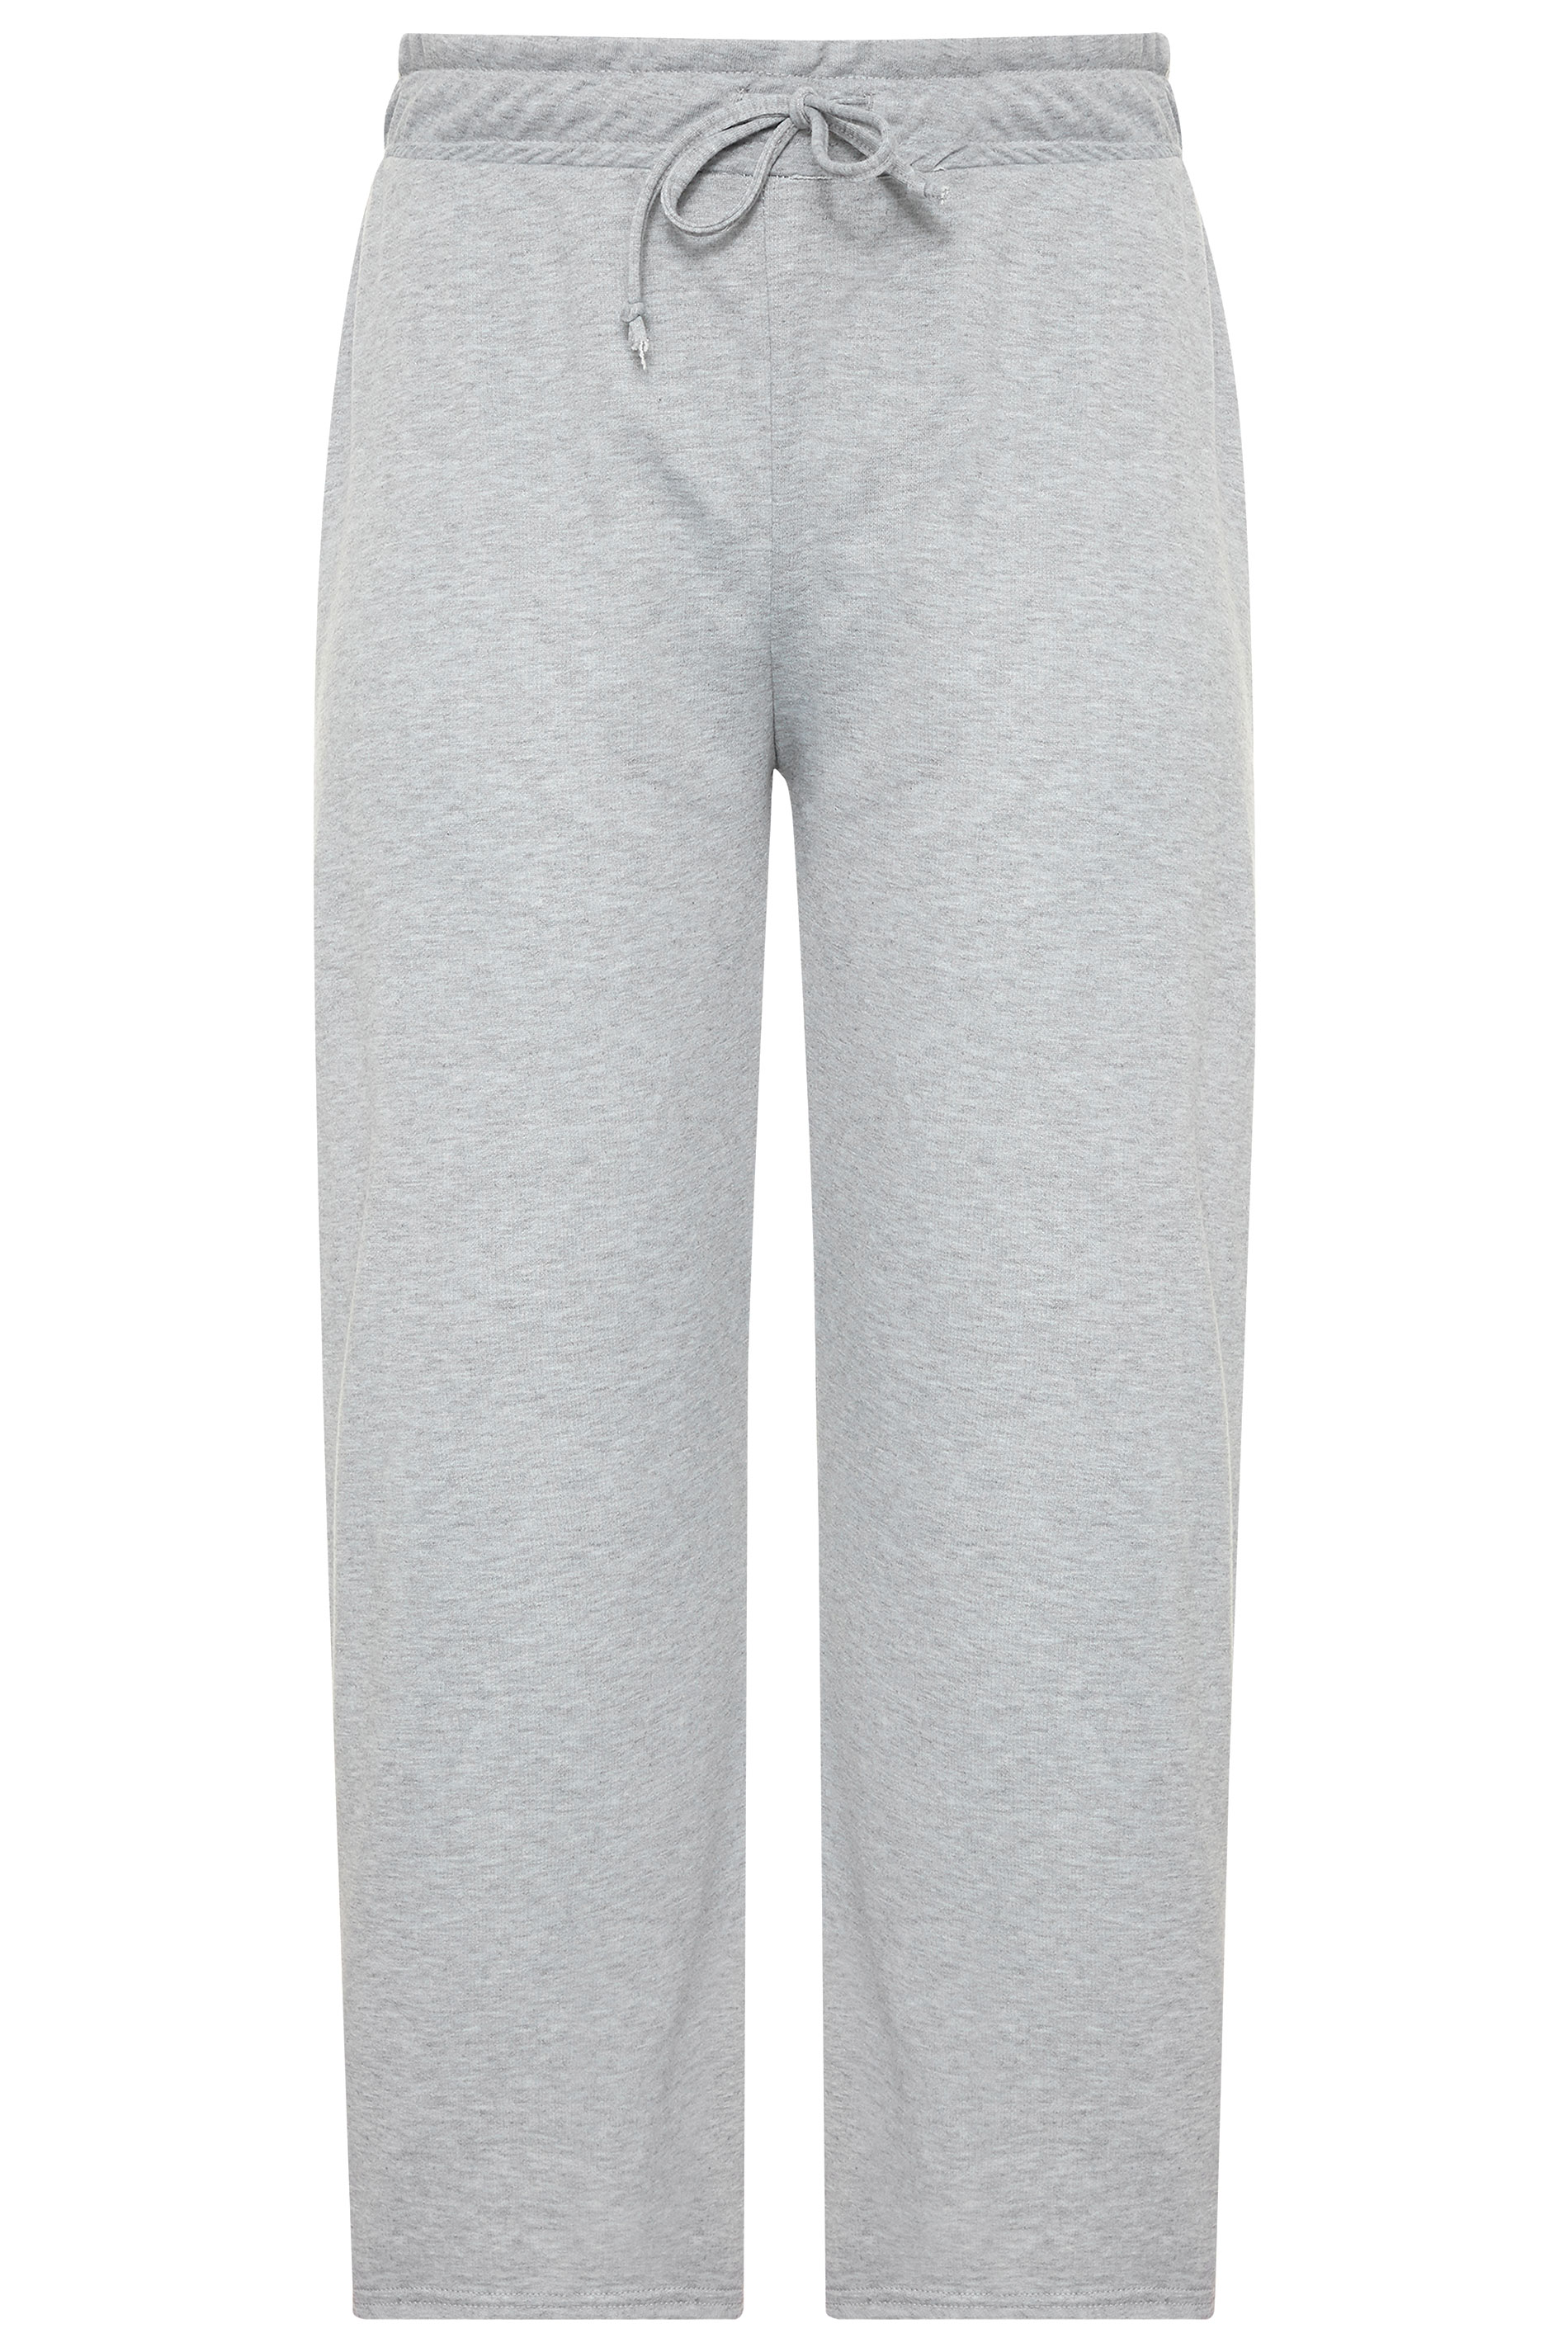 LIMITED COLLECTION Grey Marl Wide Leg Joggers | Yours Clothing